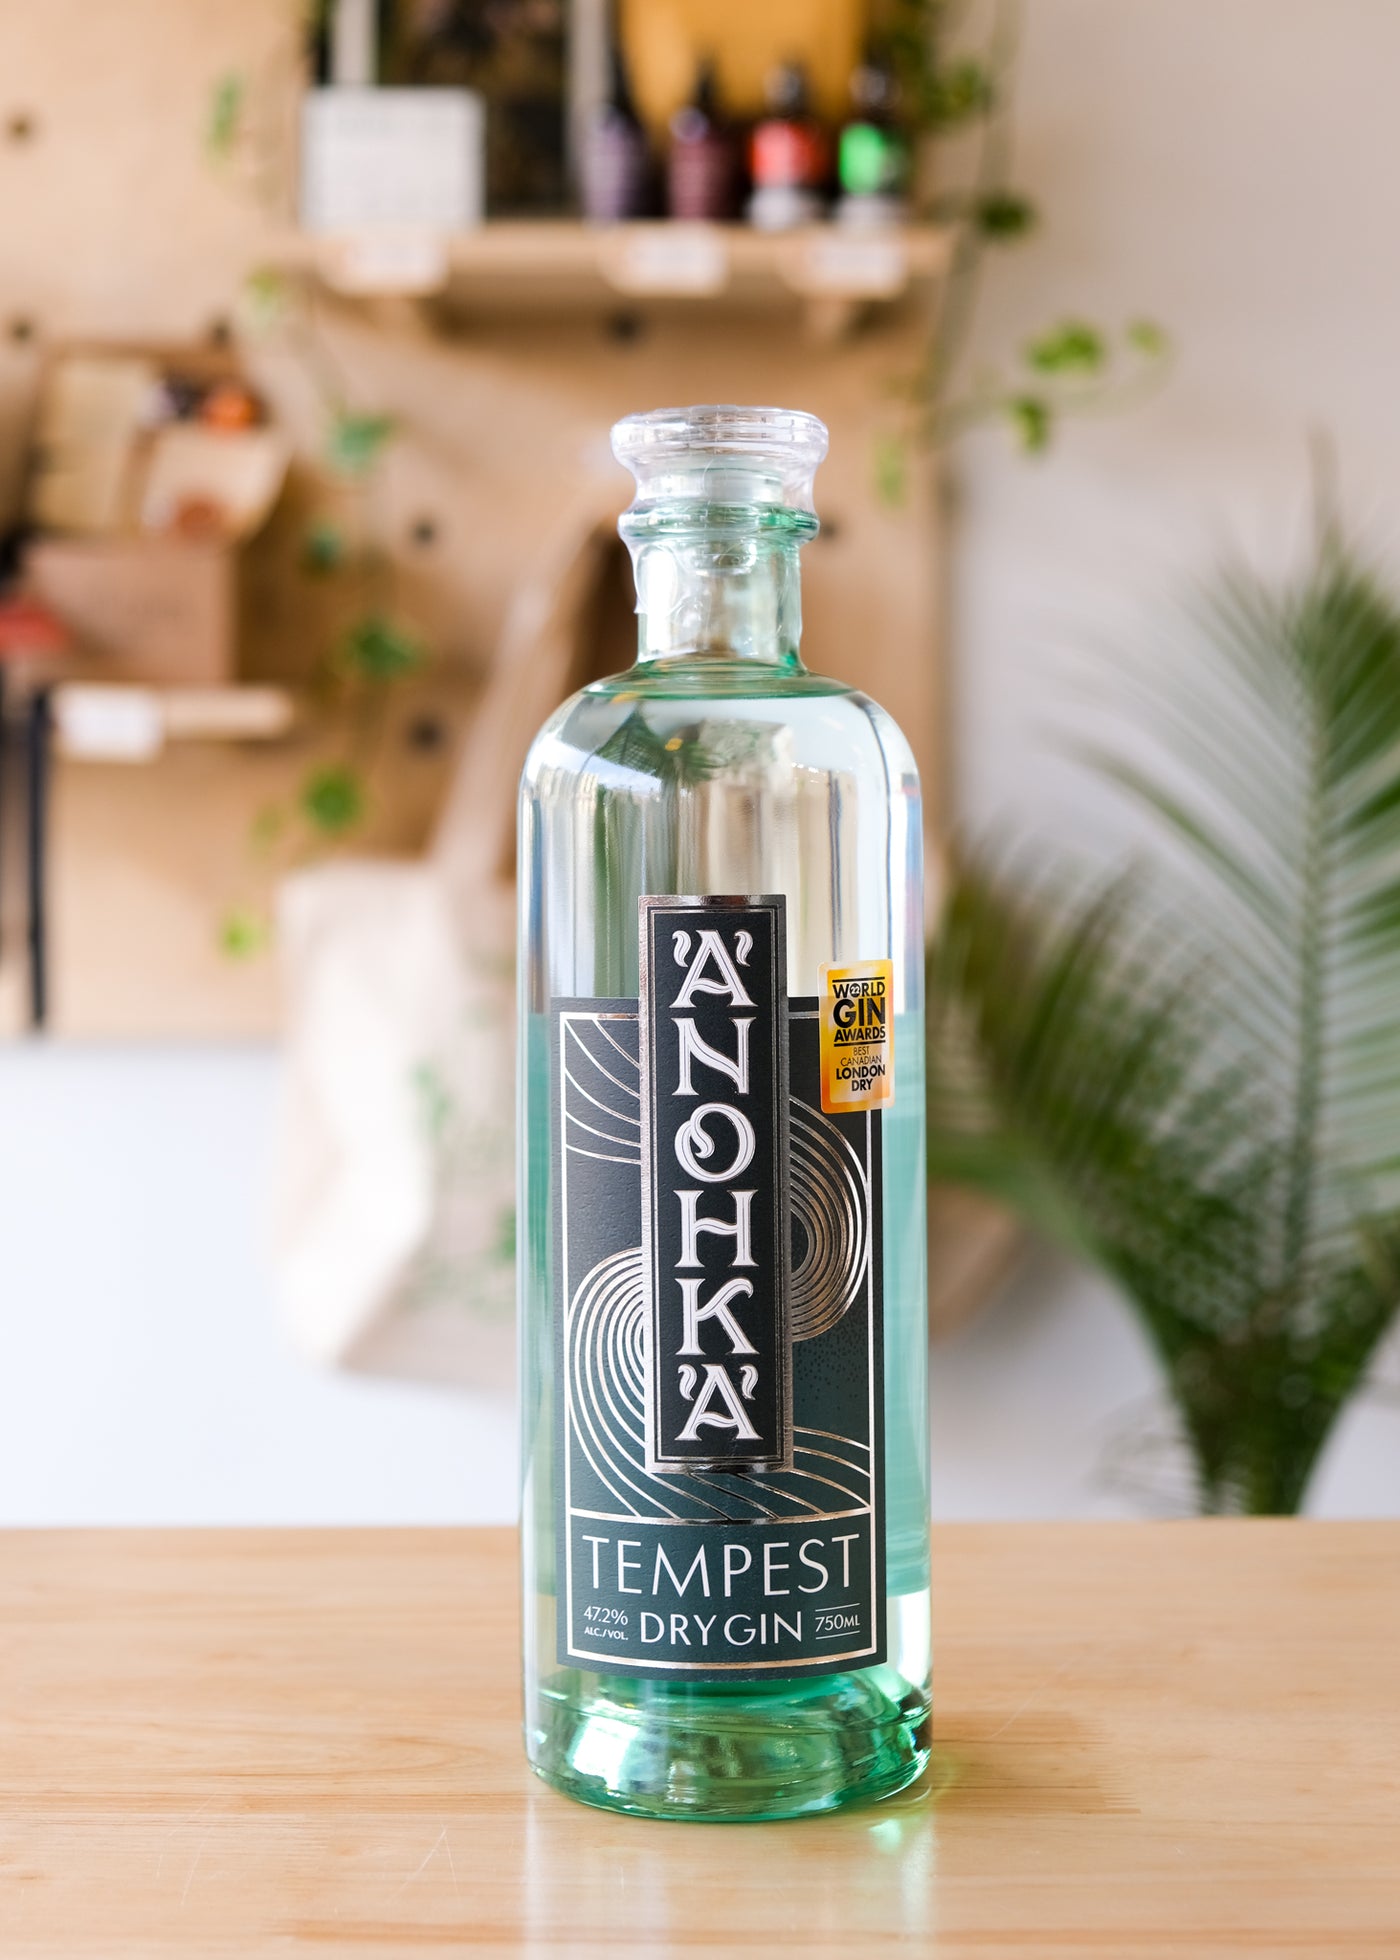 TEMPEST DRY GIN